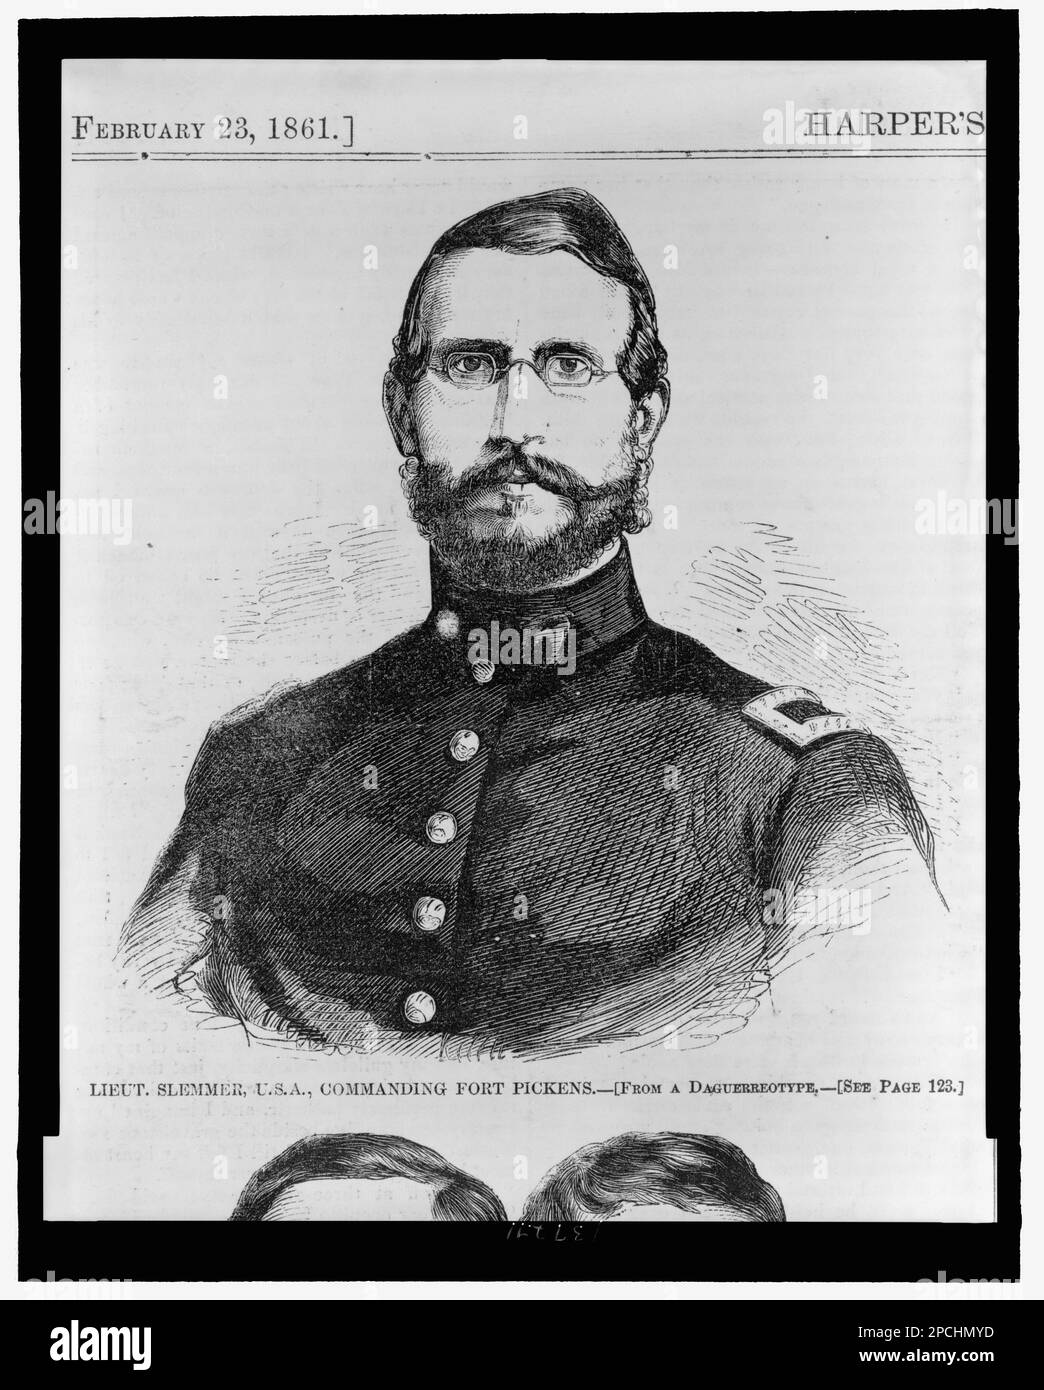 Lieut. Slemmer, U.S.A, commanding Fort Pickens from a Daguerreotype. Illus. in: Harper's weekly, v. 5, no. 217 (1861 Feb. 23), p. 125, Title from item. Slemmer, Adam J, 1824-1868, Military service, Military officers, Union, 1860, 1870, United States, History, Civil War, 1861-1865, Military personnel, Union. Stock Photo